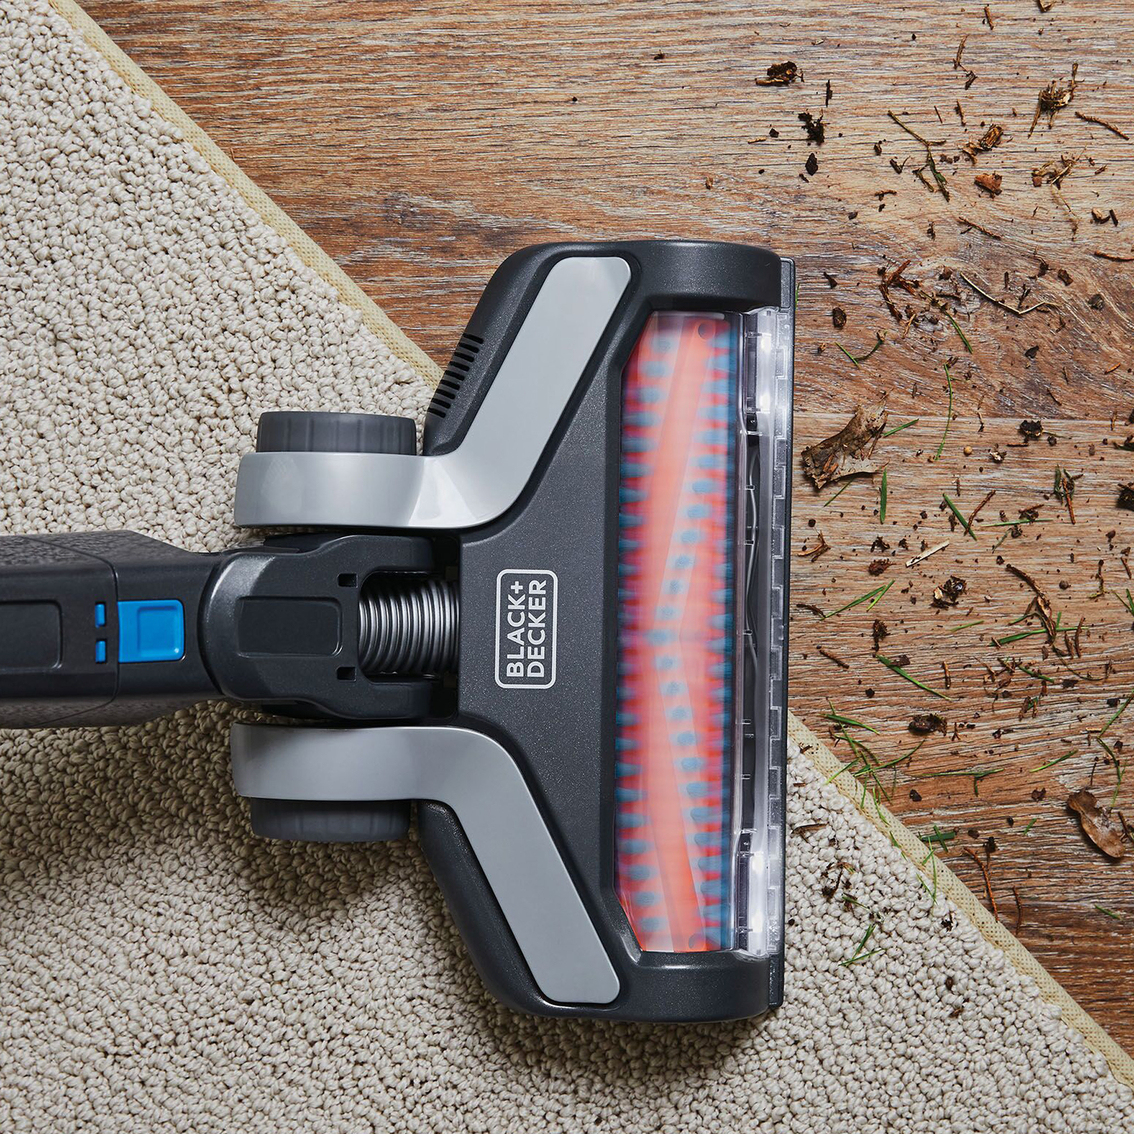 Black + Decker PowerSeries Extreme Cordless Stick Vacuum Cleaner - Image 5 of 7